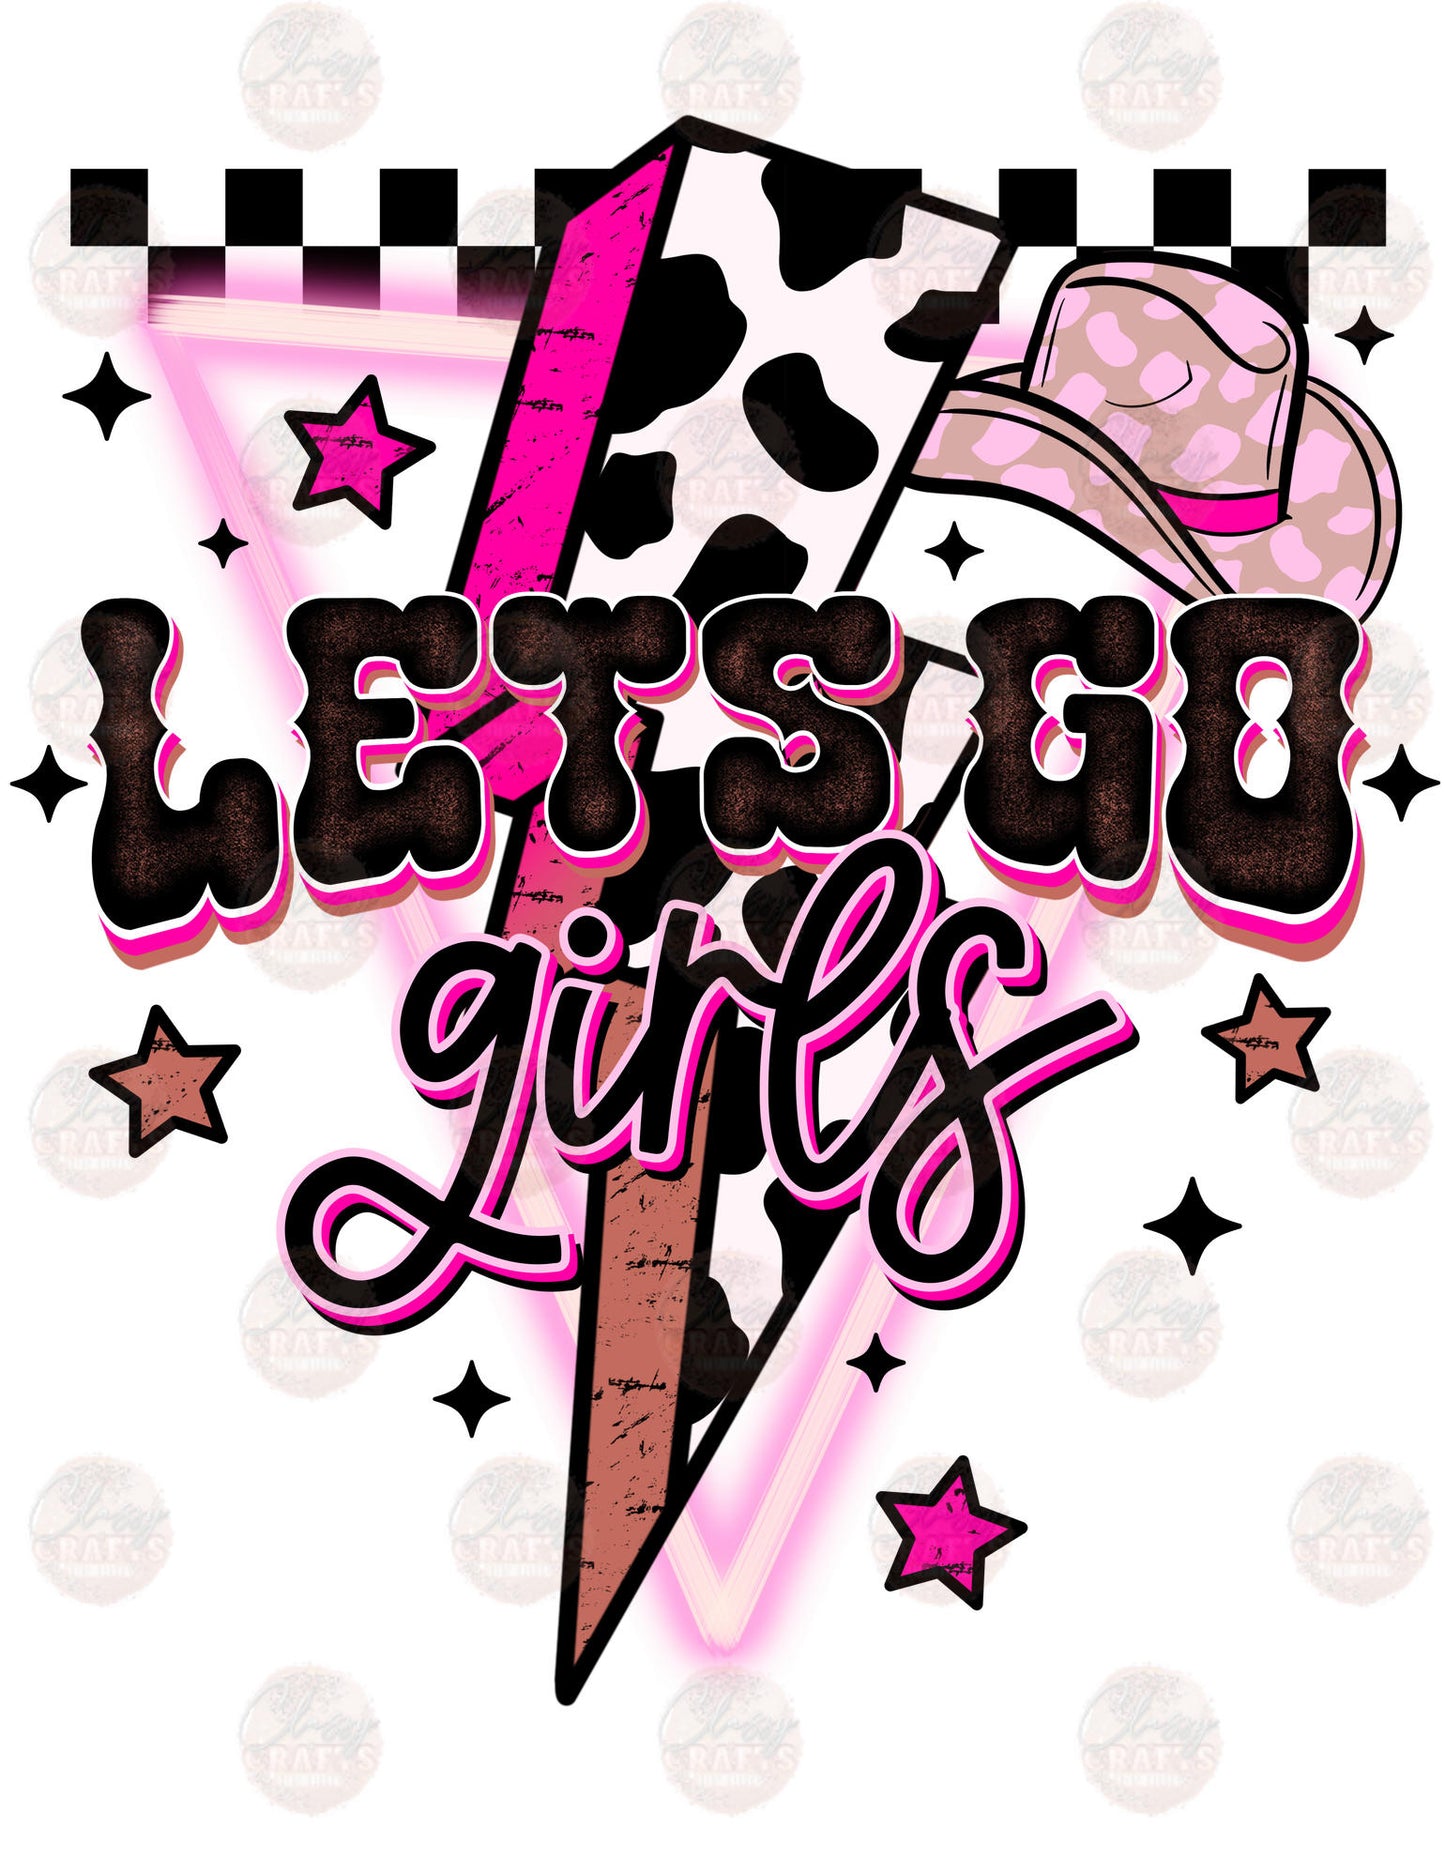 Let's Go Girls - Sublimation Transfers